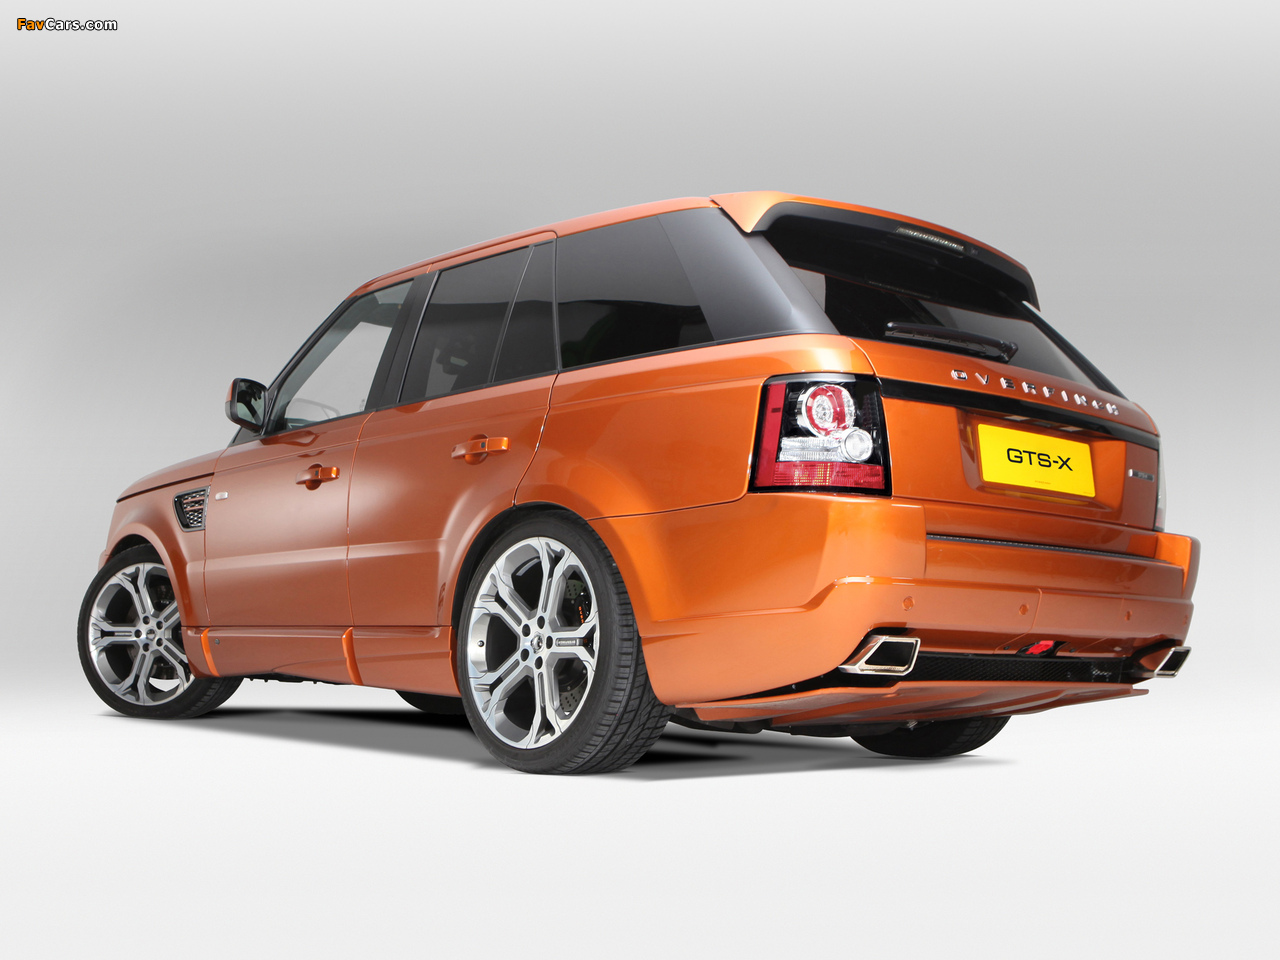 Overfinch Range Rover Sport GTS-X 2012 images (1280 x 960)